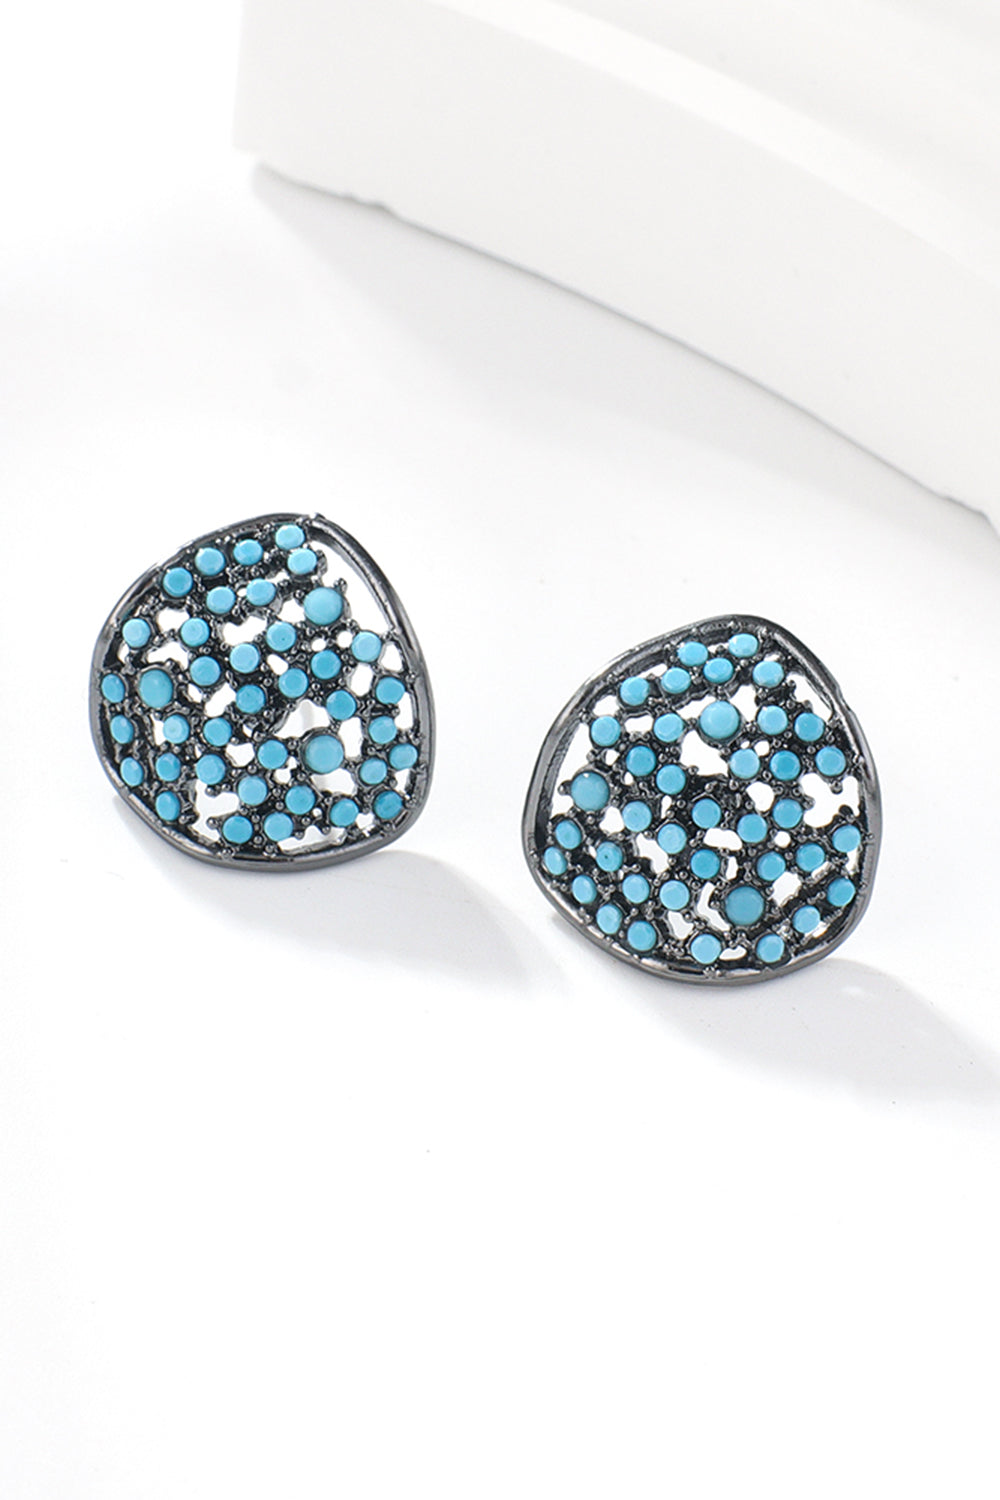 Dim Gray Turquoise Stud Earrings Sentient Beauty Fashions jewelry